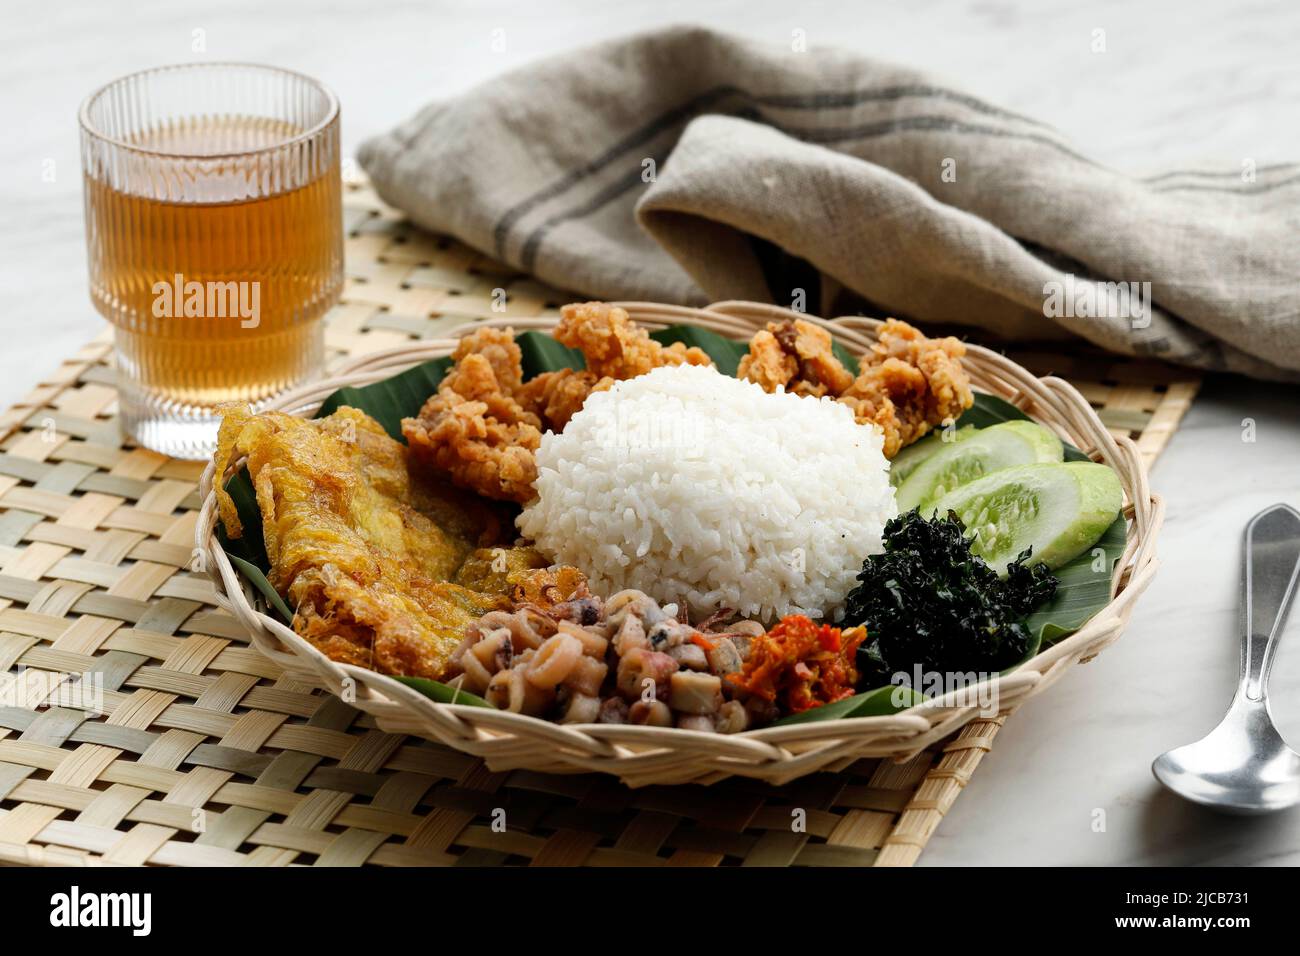 Selected Focus Nasi Campur Cumi Asin, White Rice with Sautee Salted Squid, Sambal, Egg, Kulit Ayam Crispy Chicken Skin, and Boiled Cassava Leaf. Stock Photo